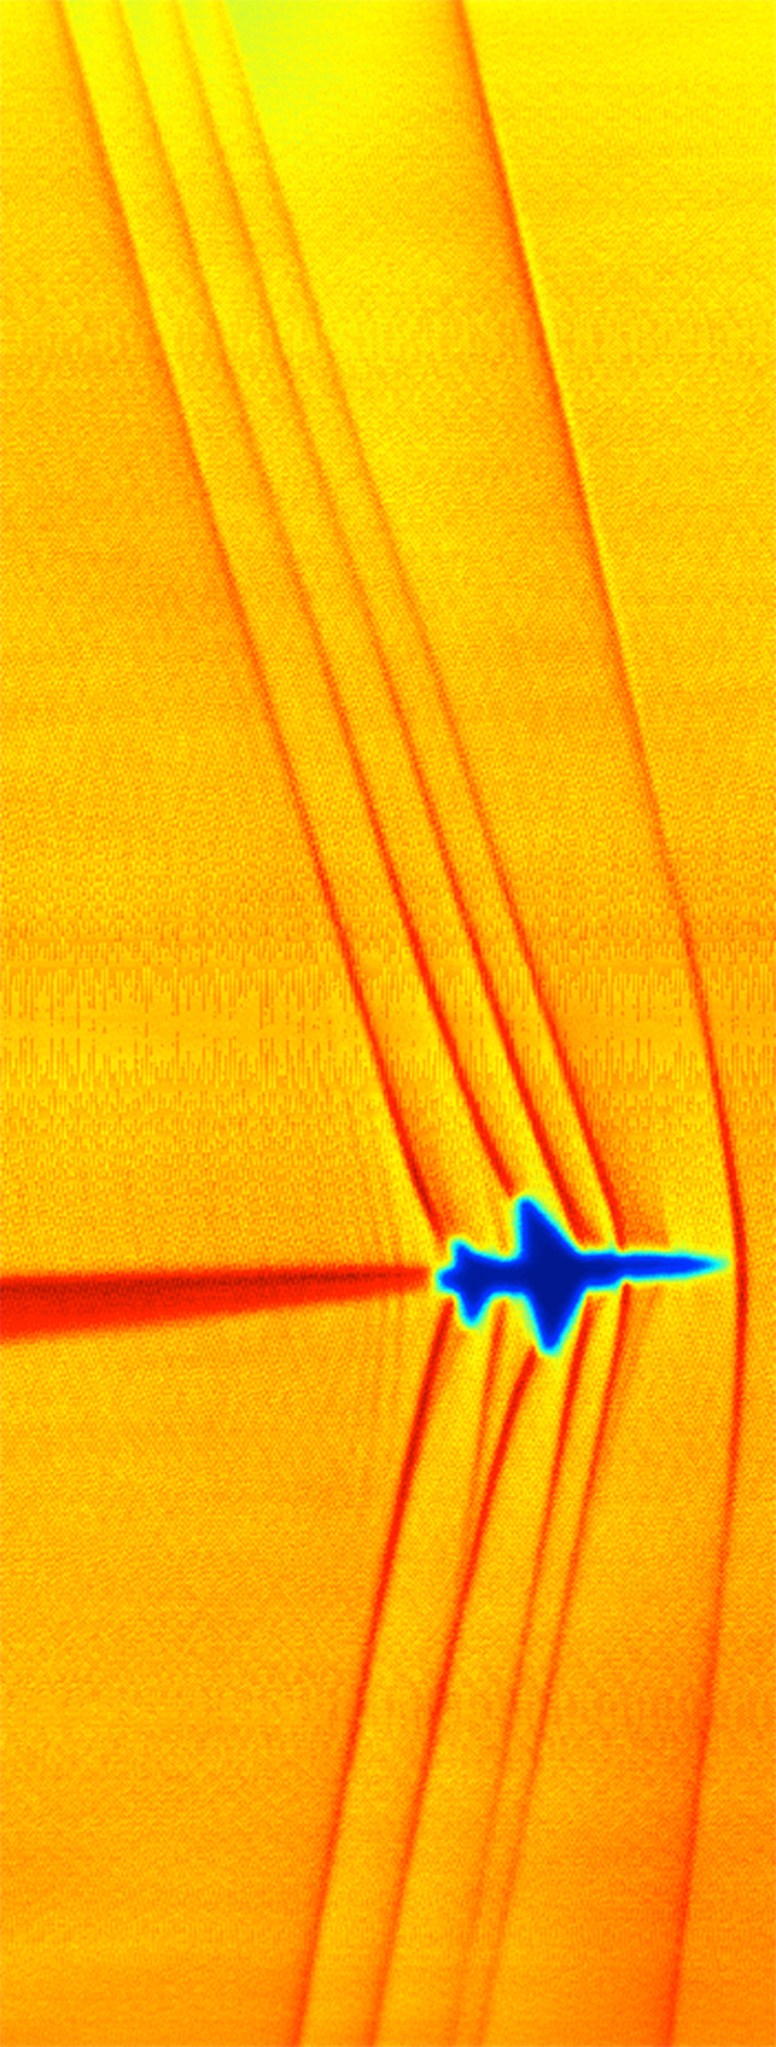 This schlieren image of shock waves created by a T-38C in supersonic flight was captured using the sun’s edge as a light source 